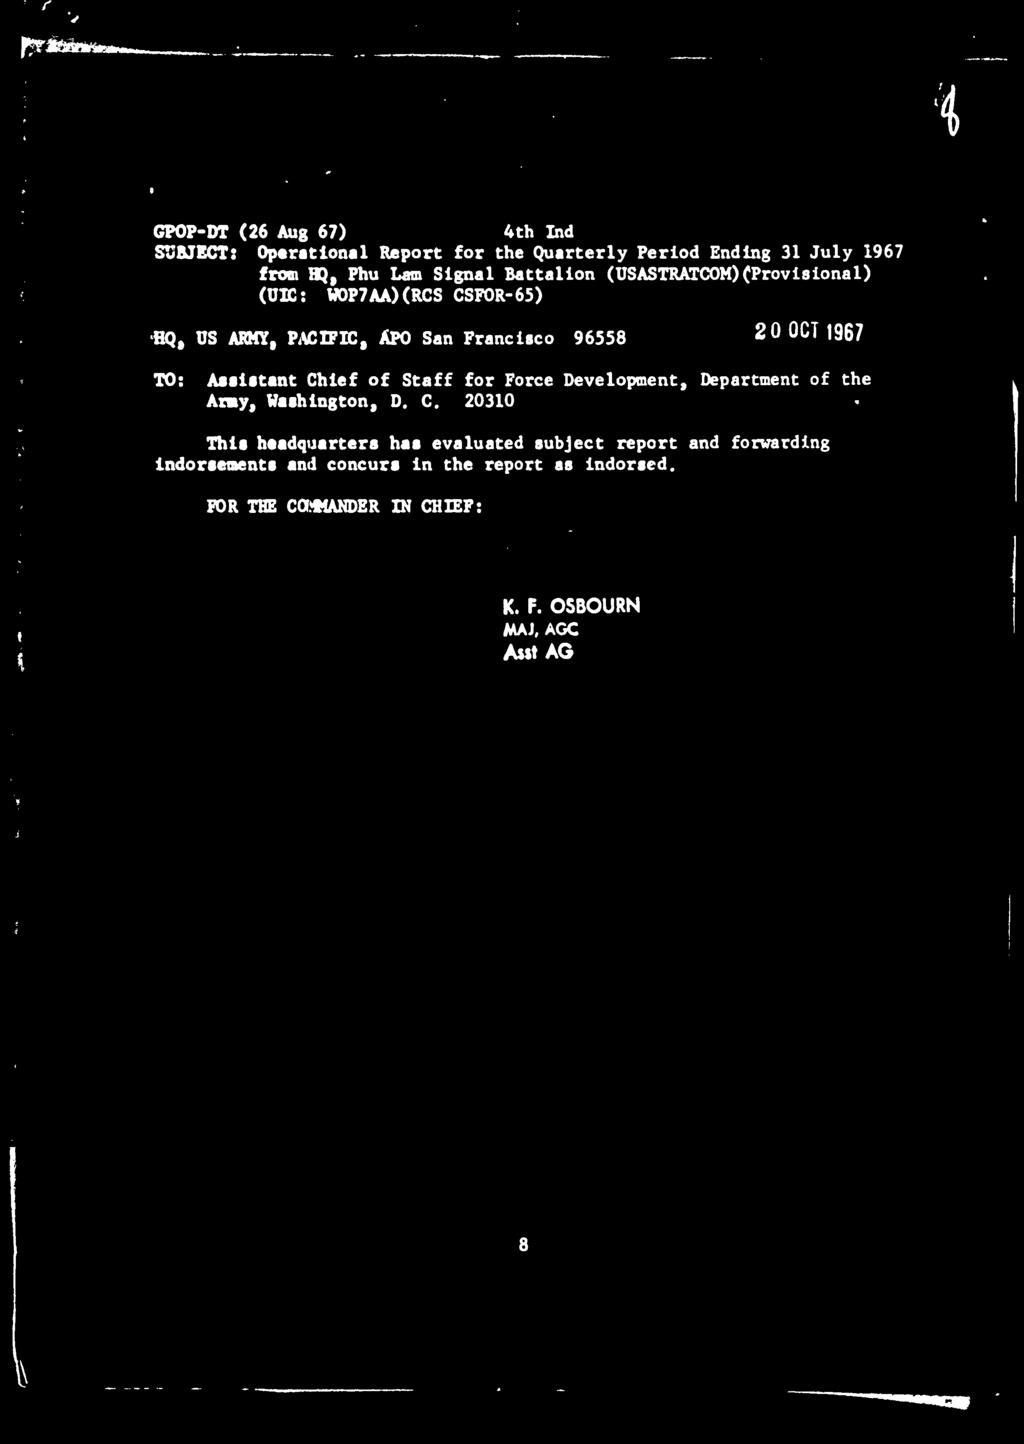 f { GPOP-DT (26 Aug 67) 4th Ind SUBJECT: Operational Report for the Quarterly Period Ending 31 July 1967 fron HQ, Phu Lam Signal Battalion (USASTRATCOM) (Provisional) (UIC: W0P7AA)(RCS CSFOR-65) HQ,